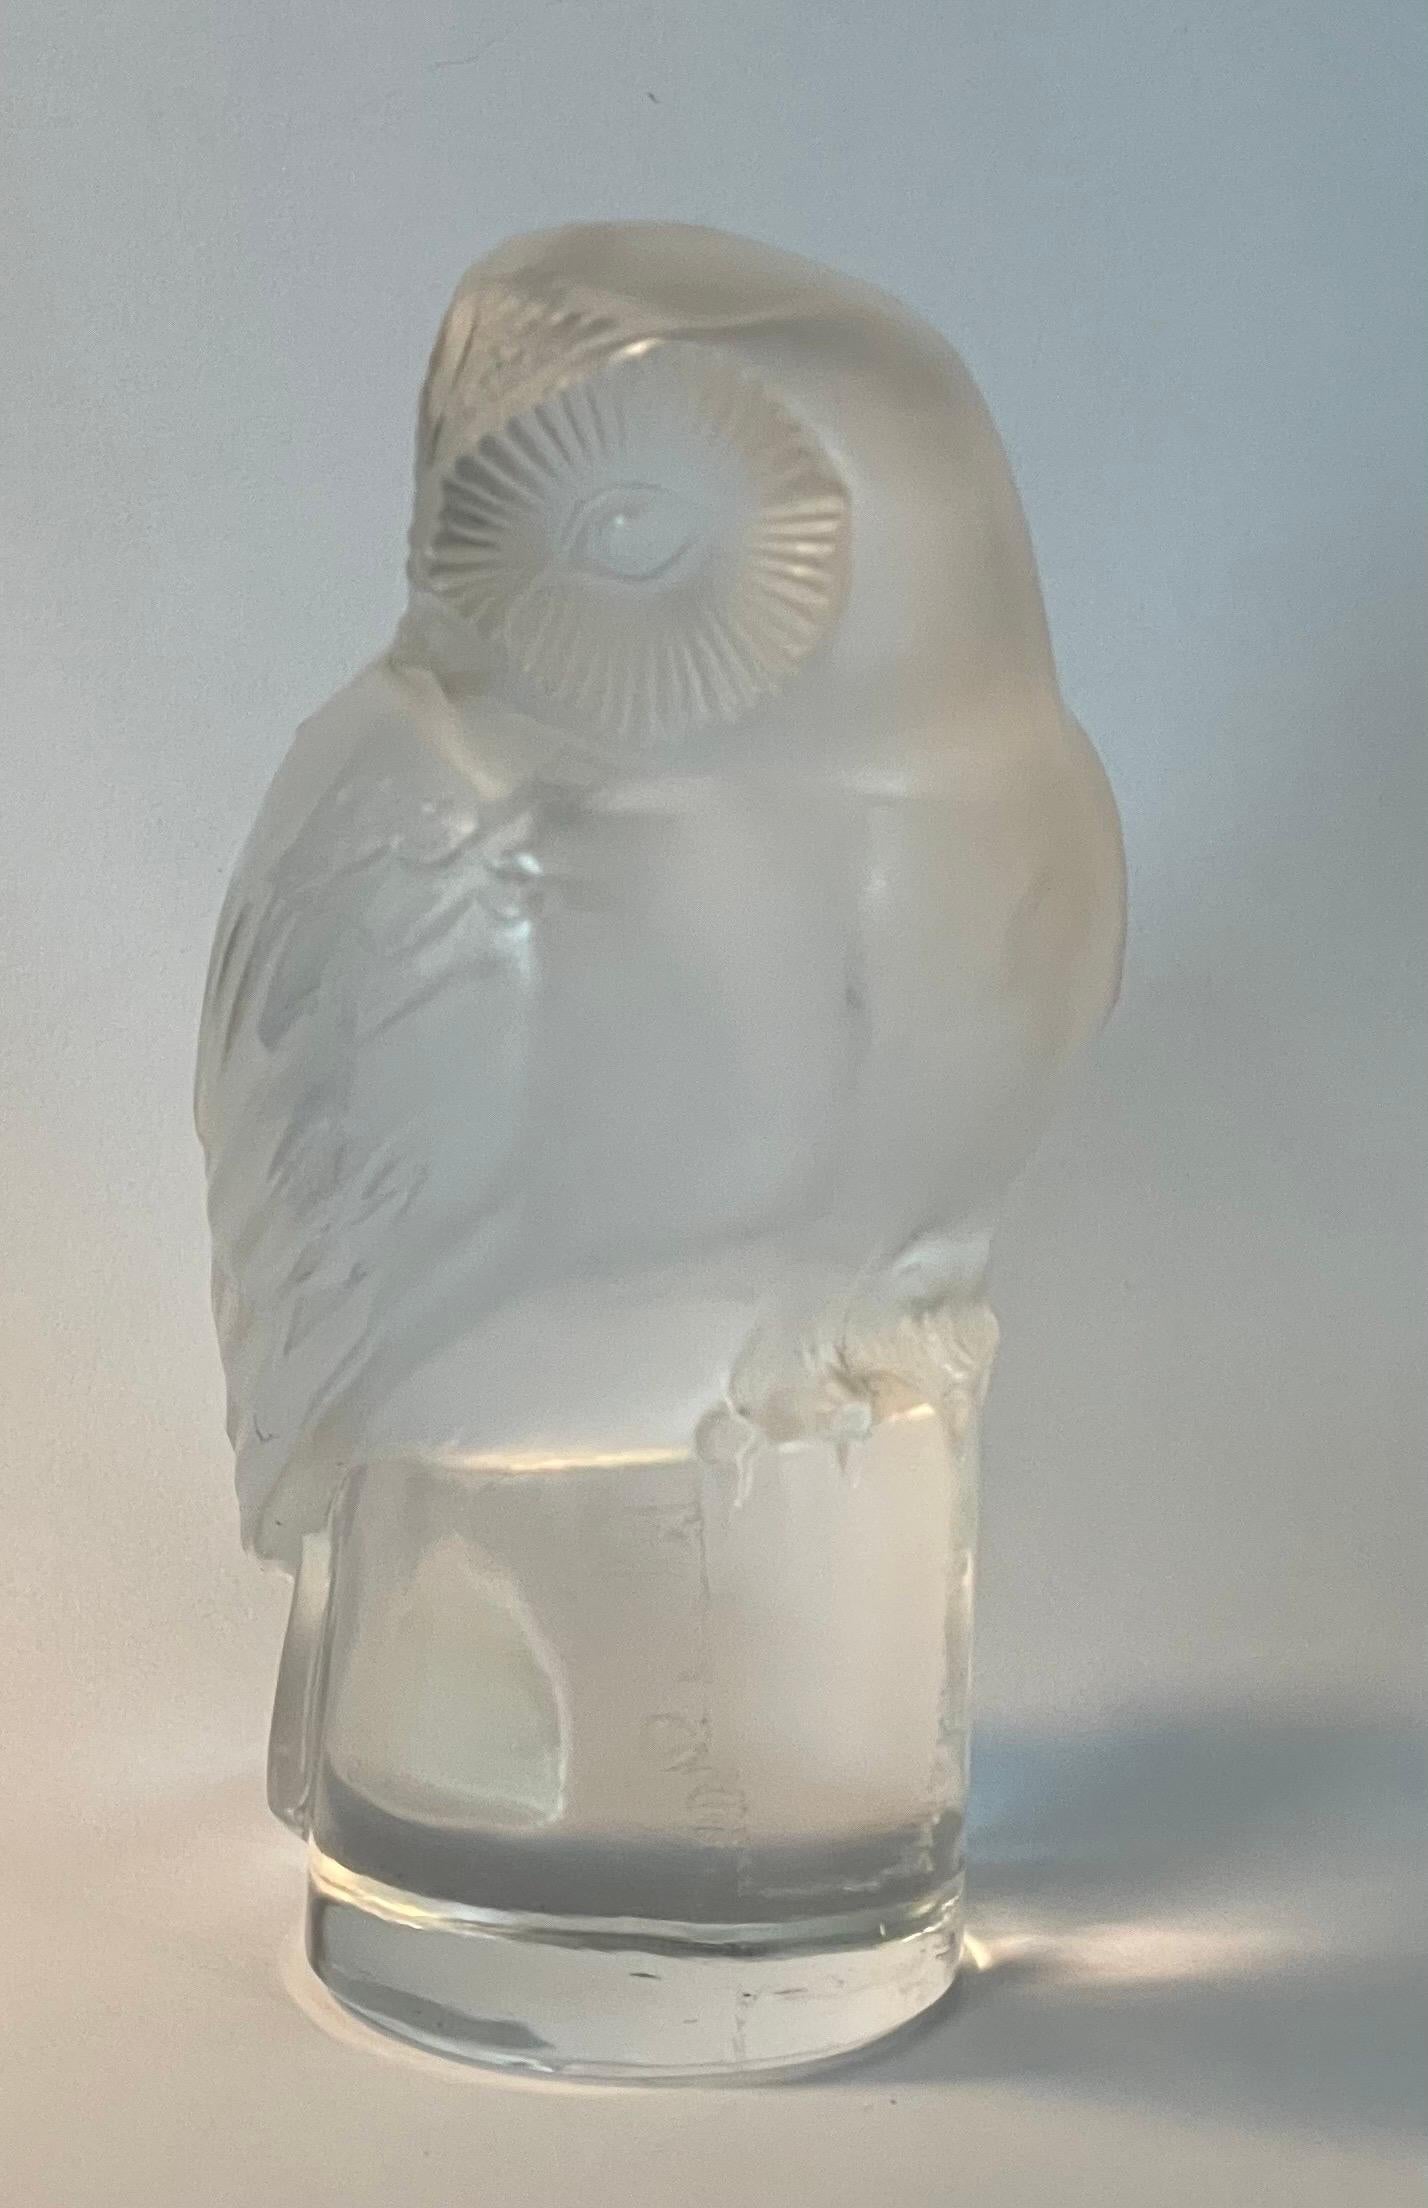 A beautiful frosted crystal owl sculpture paperweight by Lalique of France, circa 1990s. This gorgeous piece is in very good vintage condition with no chips or cracks and measures 2